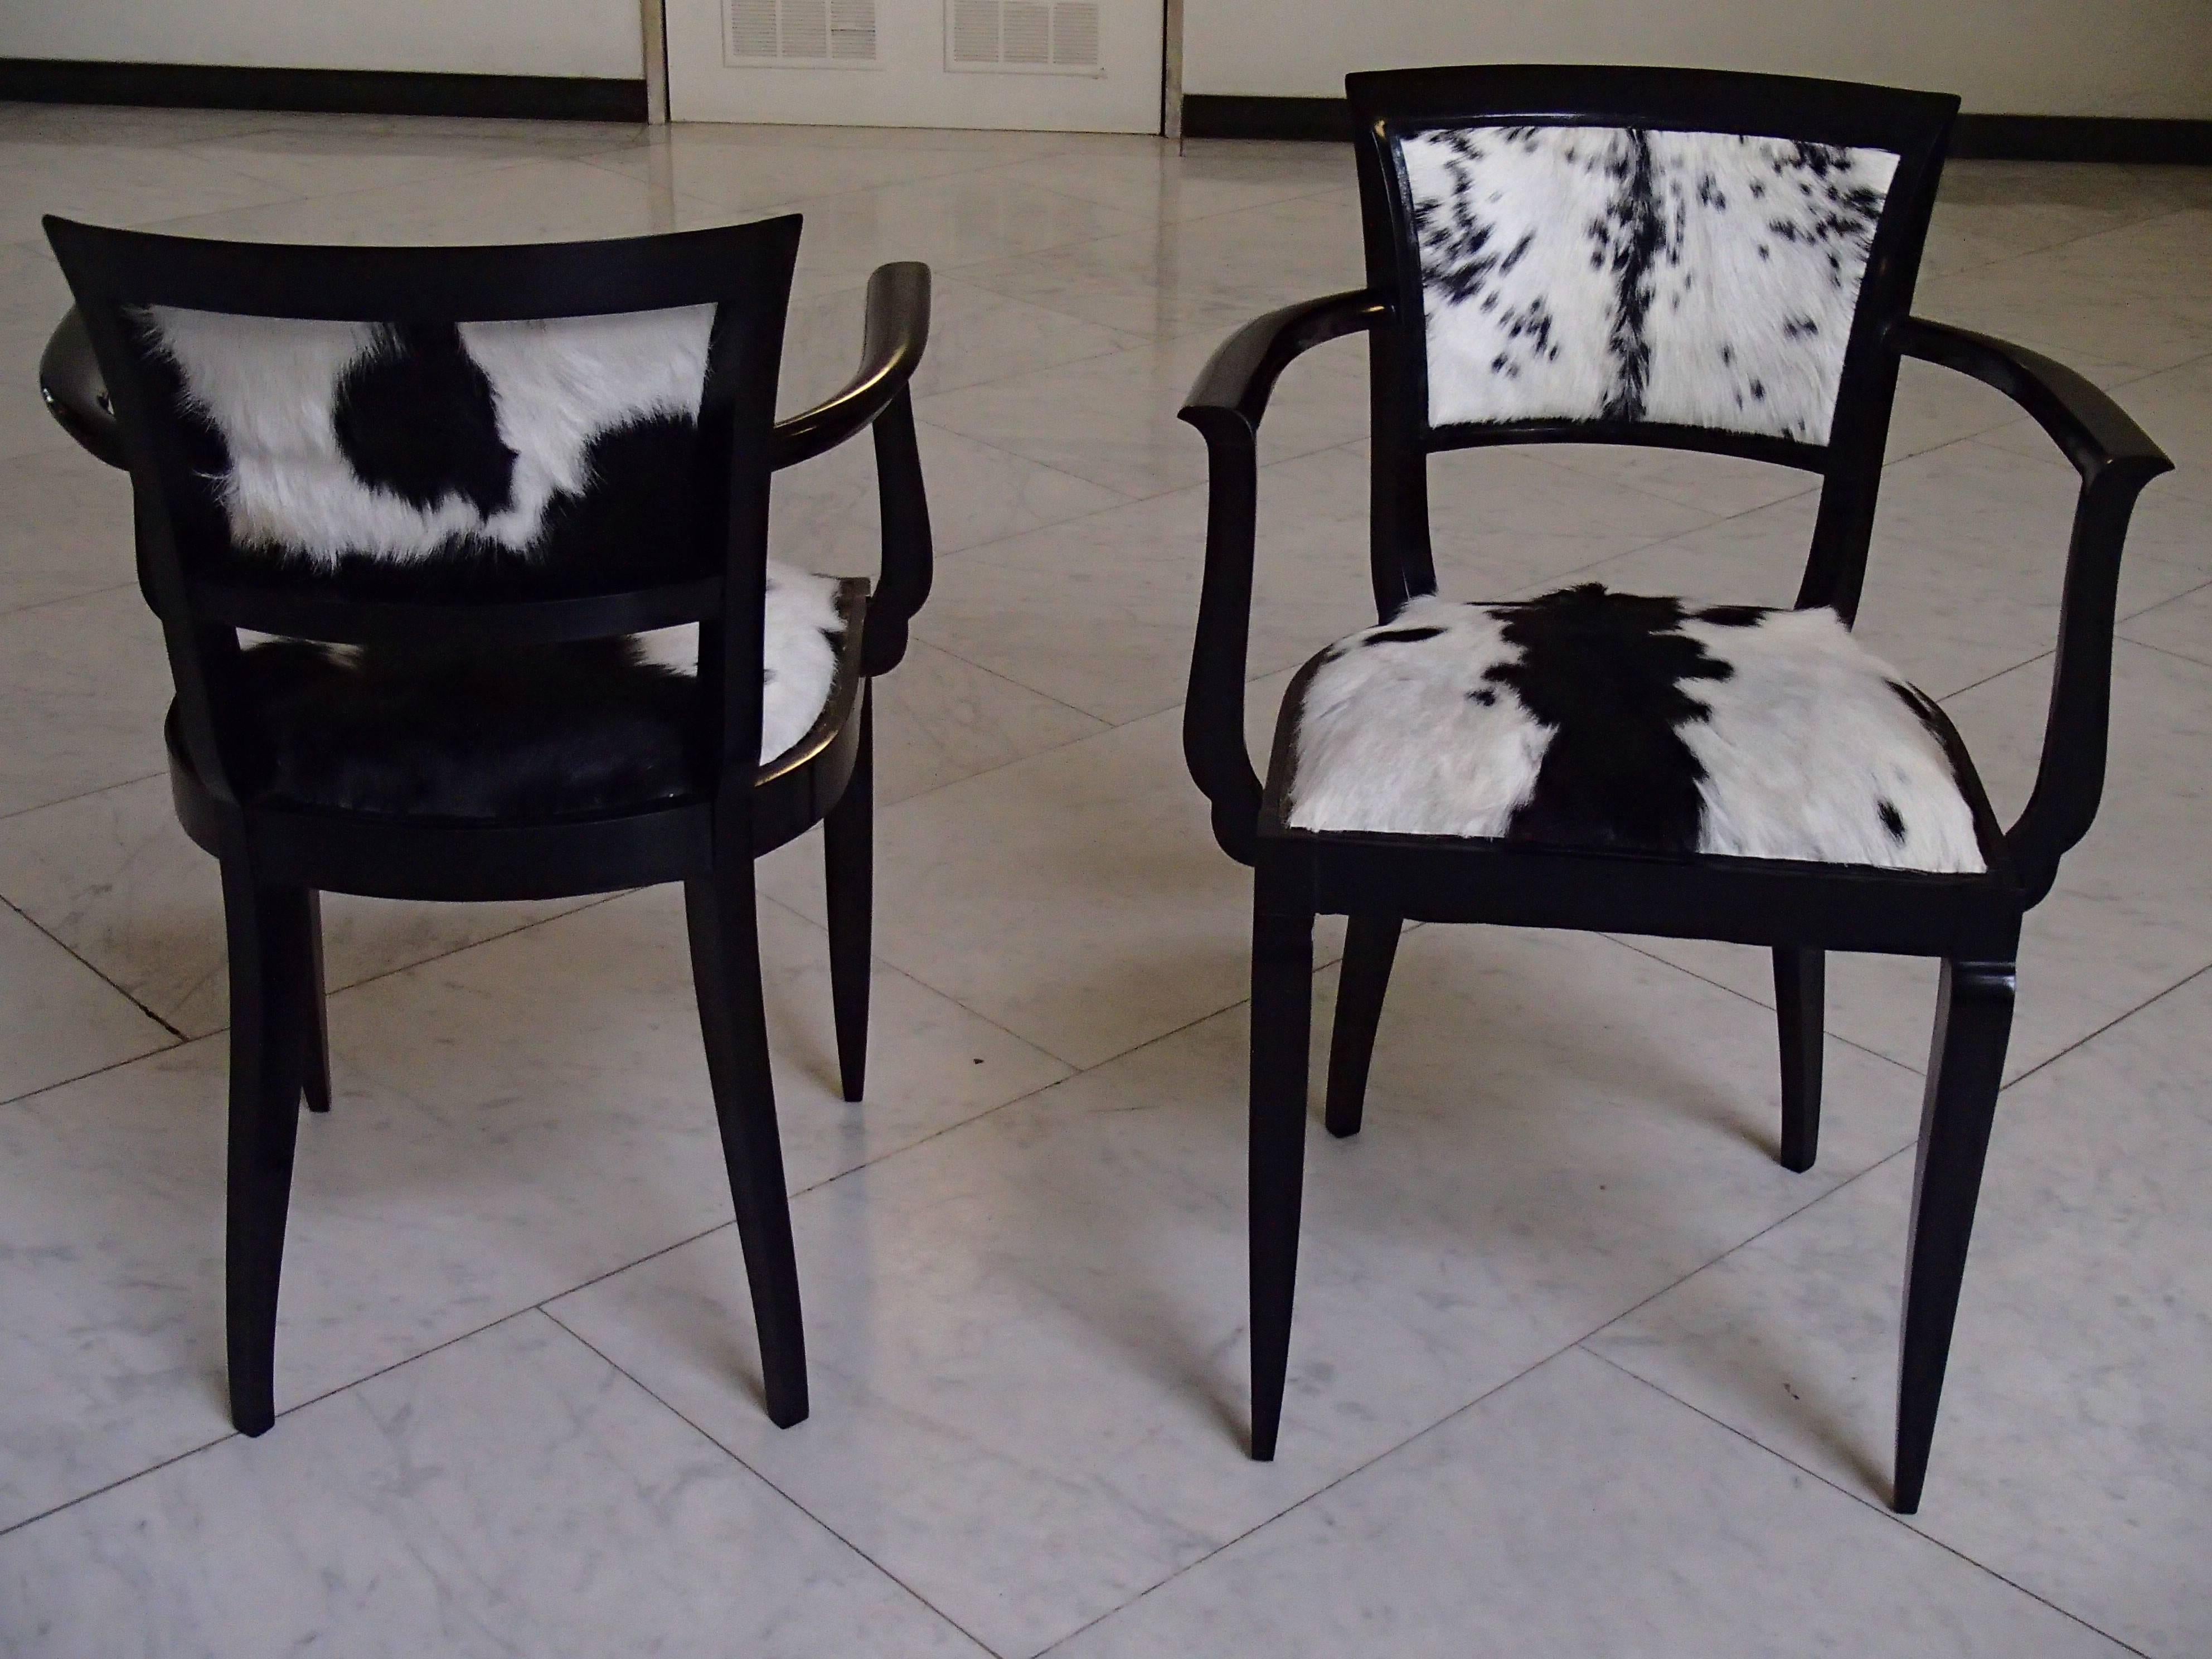 Pair of Art Deco Side Chairs Black Recovered with Black and White Goat Skin 1